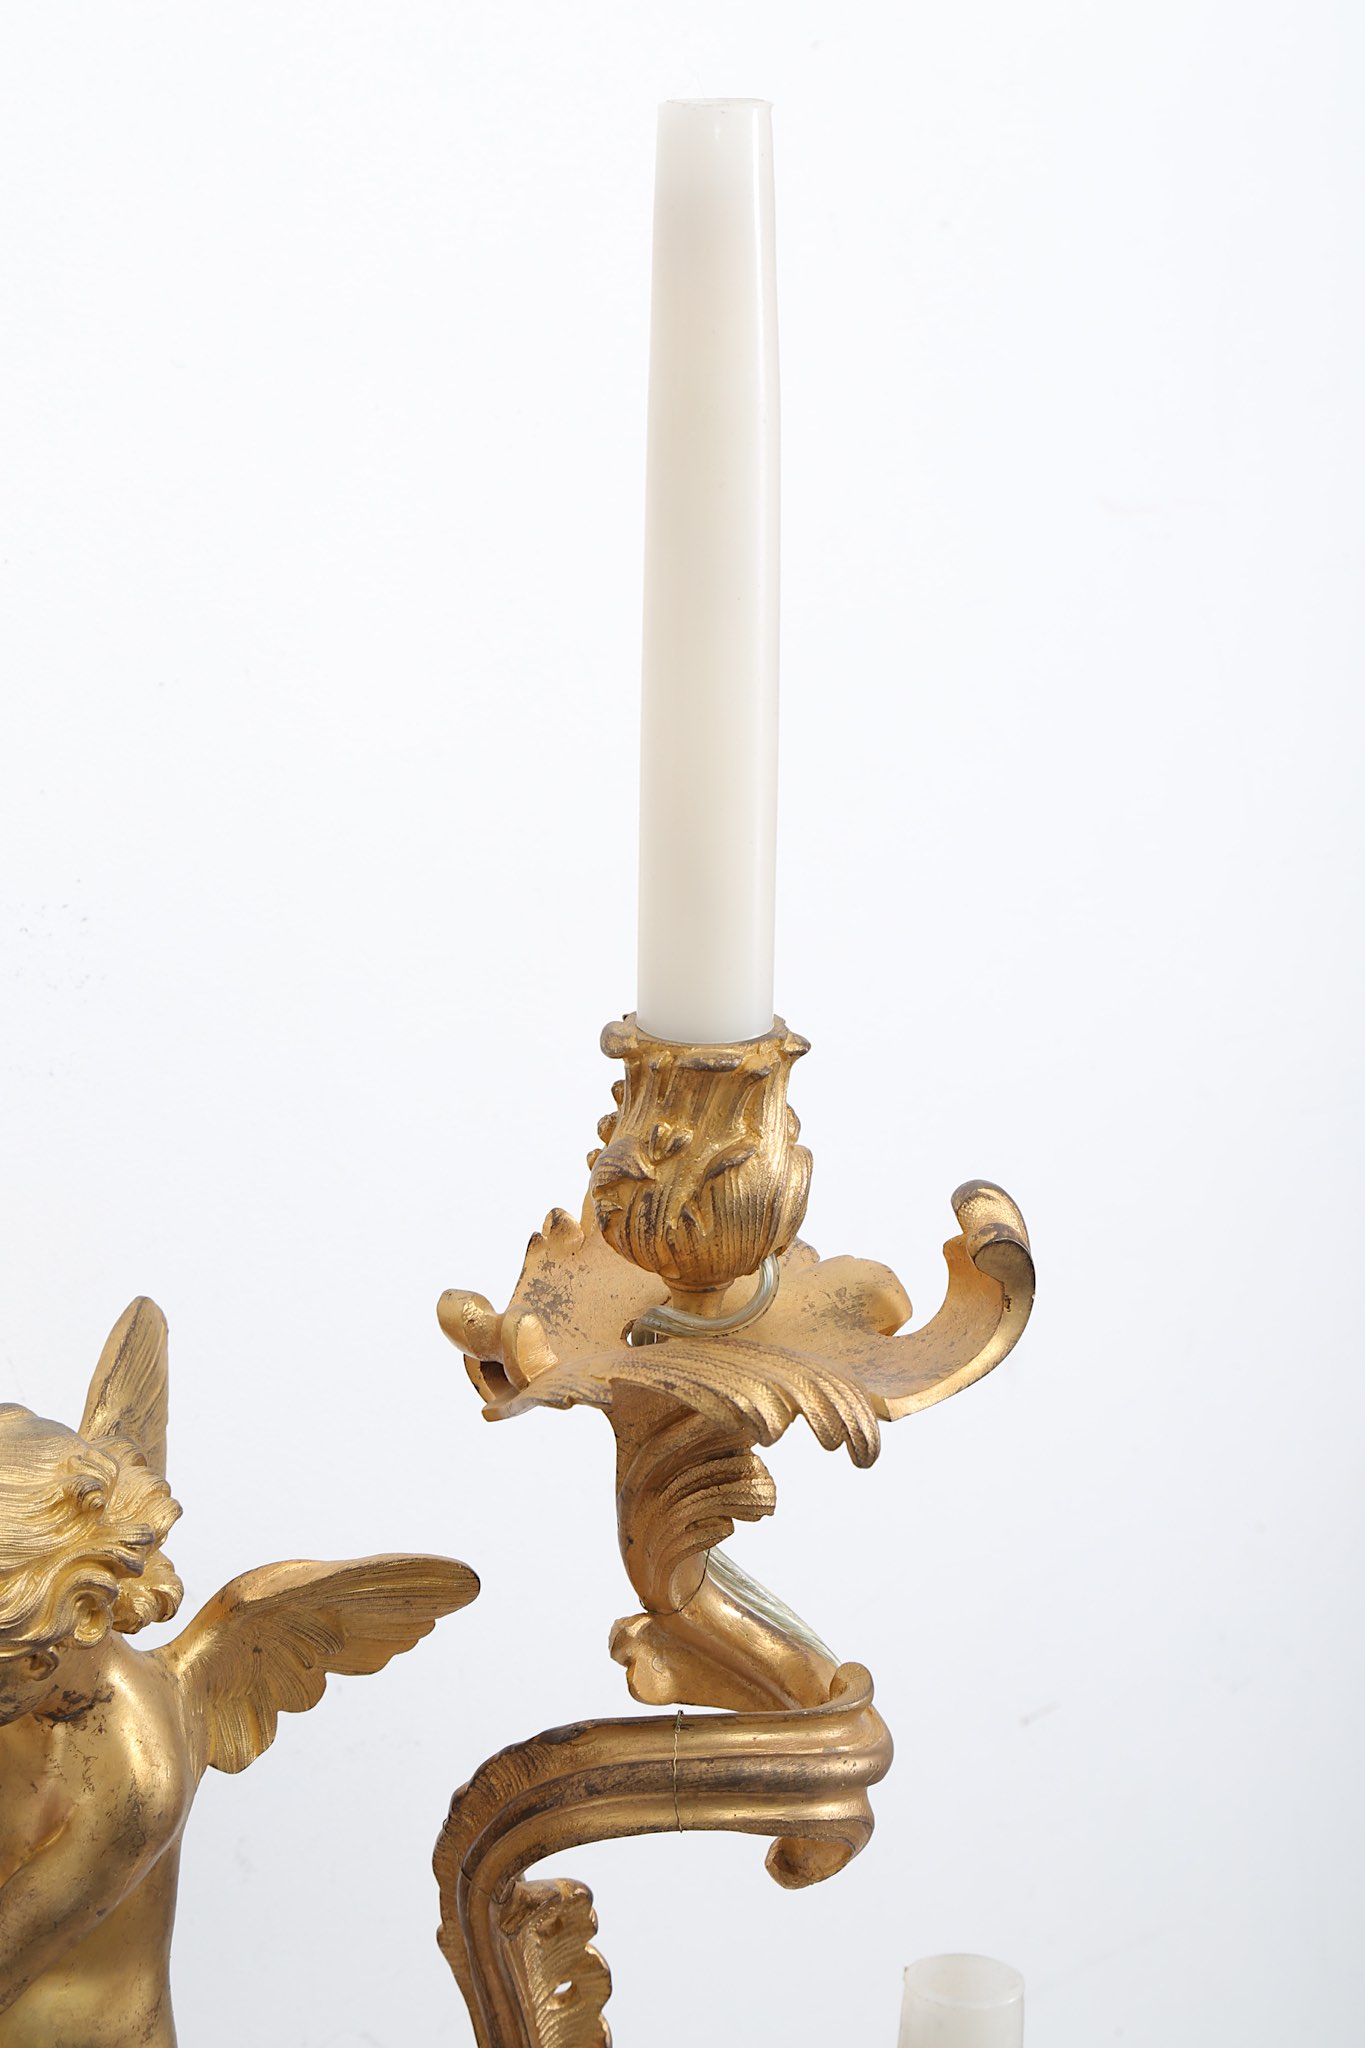 A LARGE AND IMPRESSIVE PAIR OF 19TH CENTURY FRENCH GILT BRONZE FIGURAL WALL LIGHTS IN THE ROCOCO - Image 5 of 7